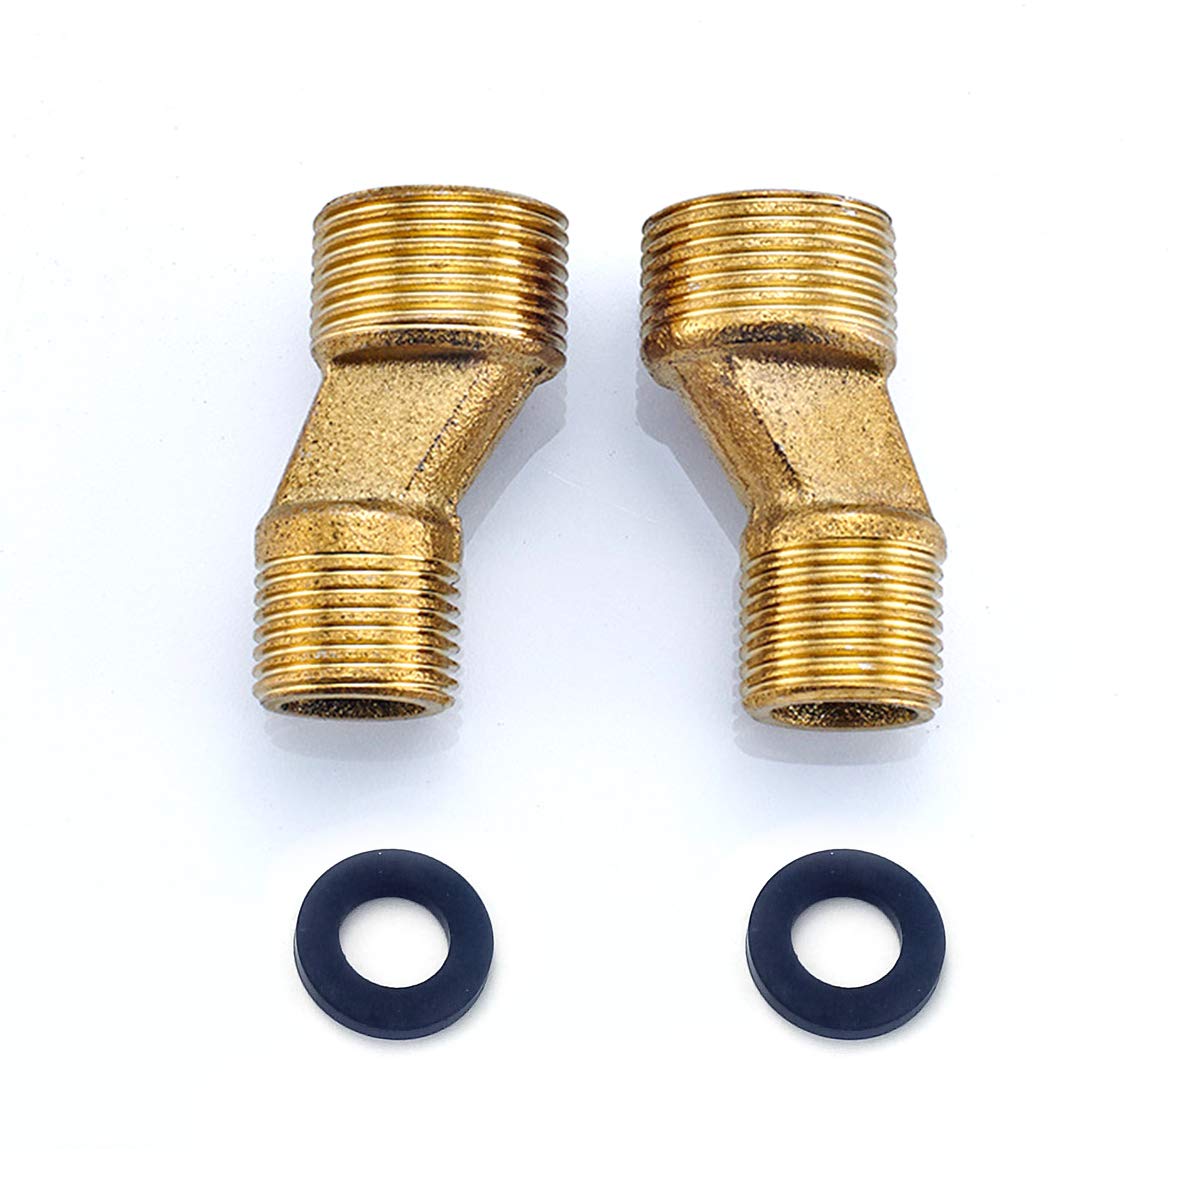 Brass Adapter for Shower Faucet Install Kit Adjustable